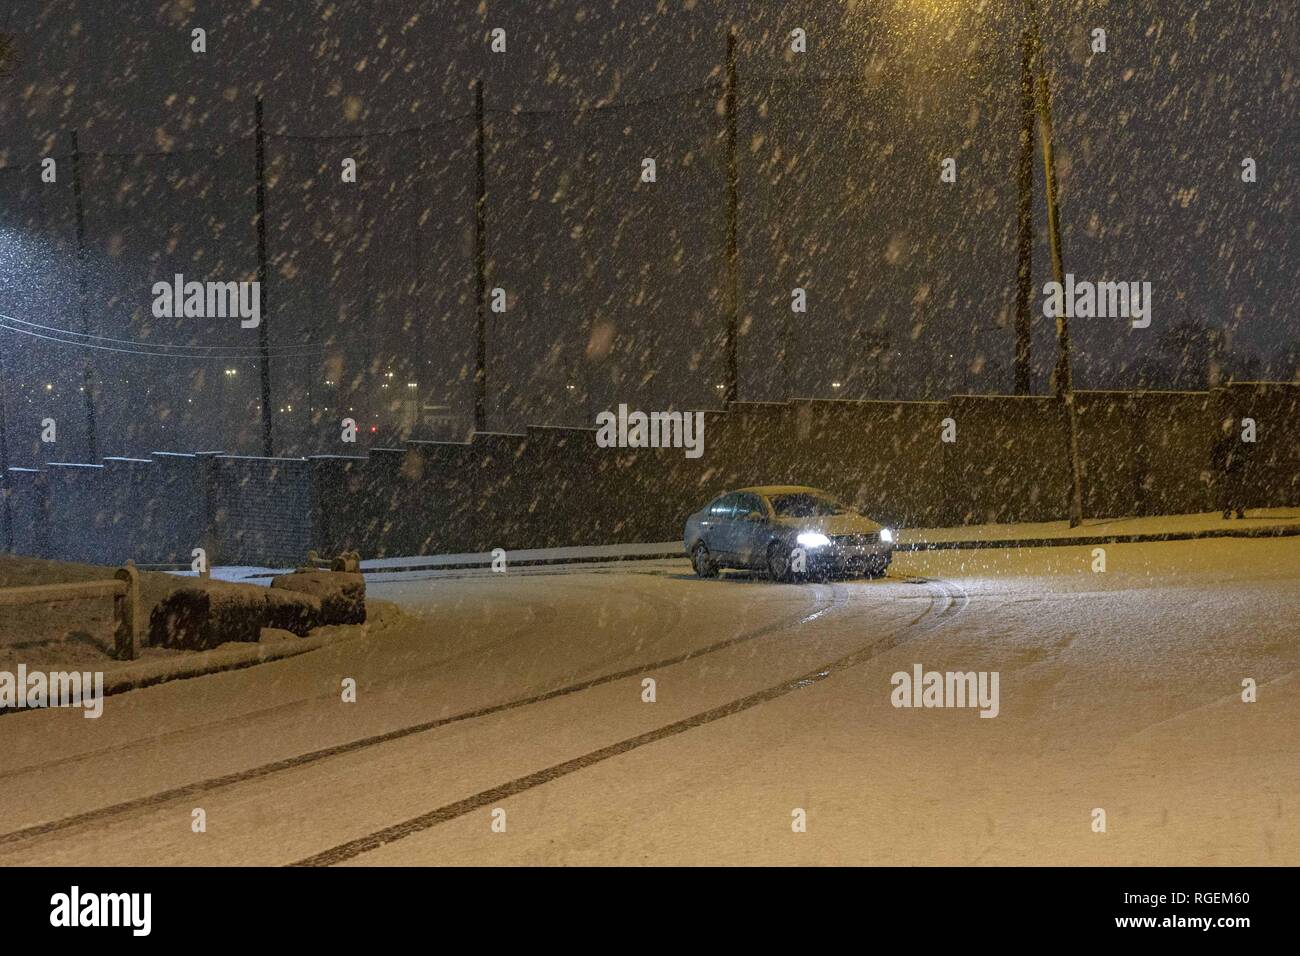 Cork, Ireland, 29th January, 2019.   Snow in Ballyvolane, Cork City. Today a Yellow Weather Warning was put in place accross the country by MET Eireann for ice and snow. Heavy snowfall hit parts of Cork City and County throughout the day making some roads treacherous and driving particulary dangerous throughout the city. Pictured here is a car attempting to drive up Ballincollie Road. Credit: Damian Coleman/ Alamy Live News. Stock Photo